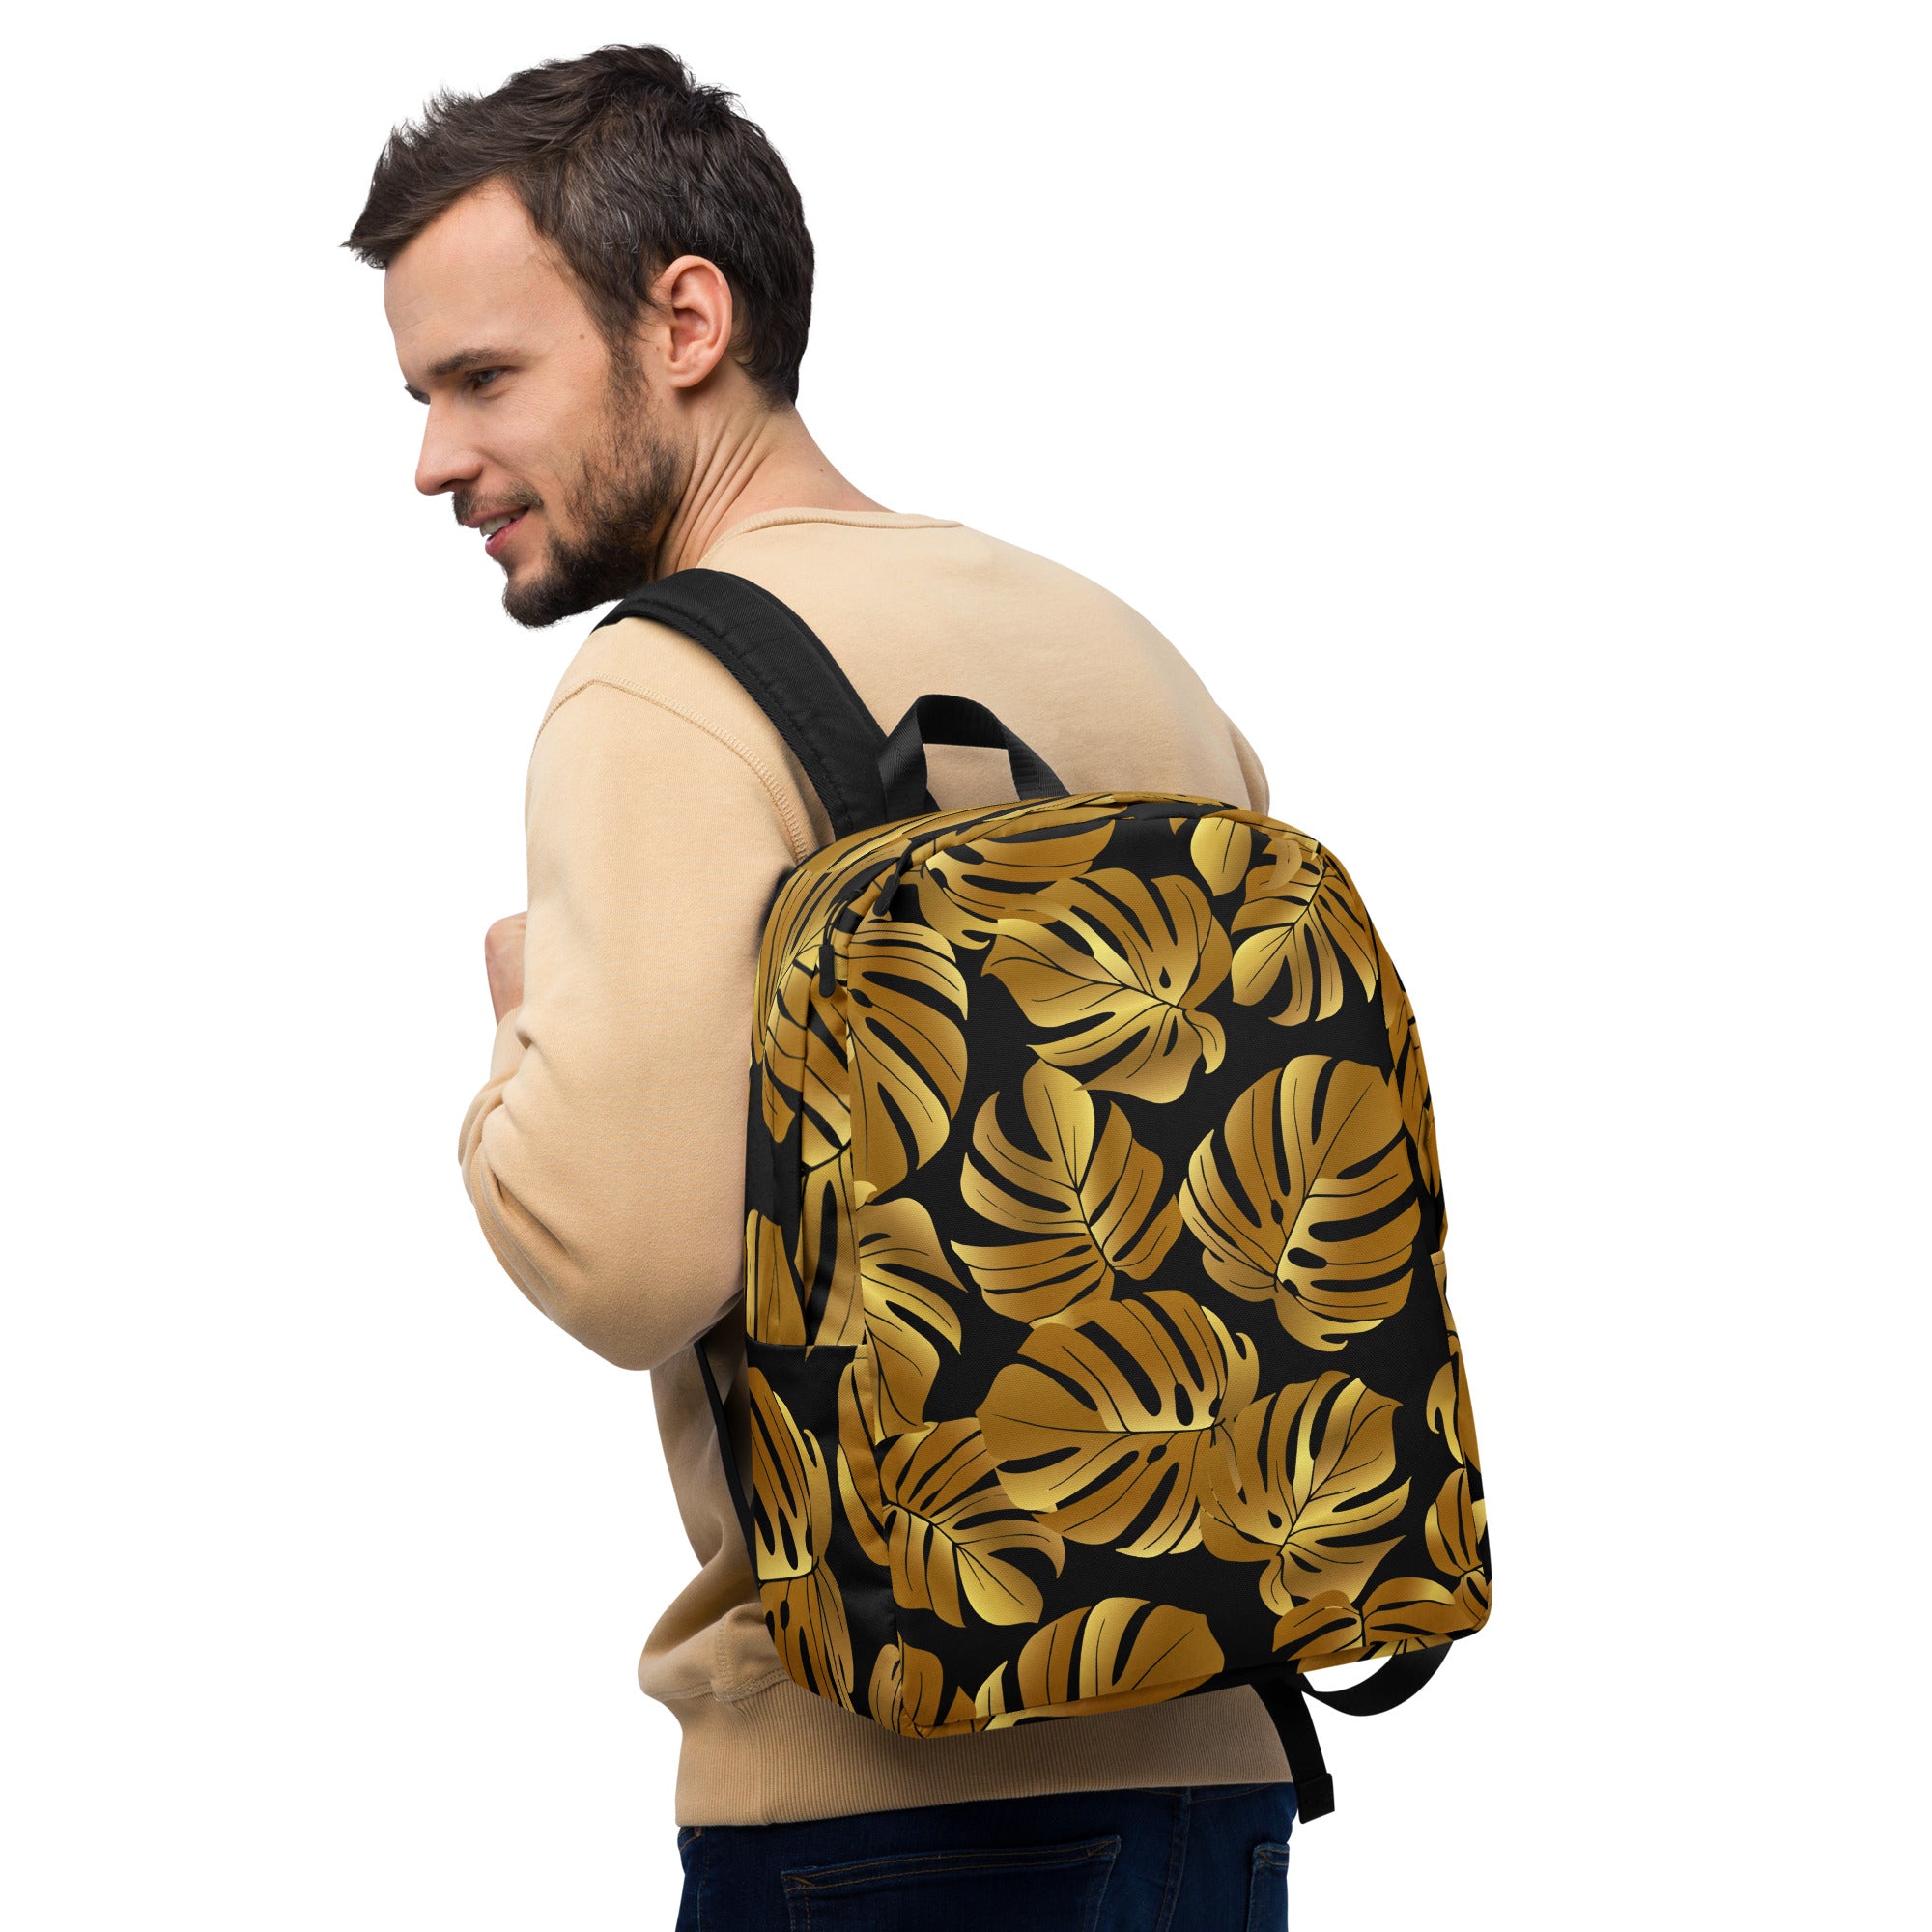 Tropical, Golden Leaf, Minimalist, Backpack, Travel, Fashion, Accessories, Style, Adventure, Nature